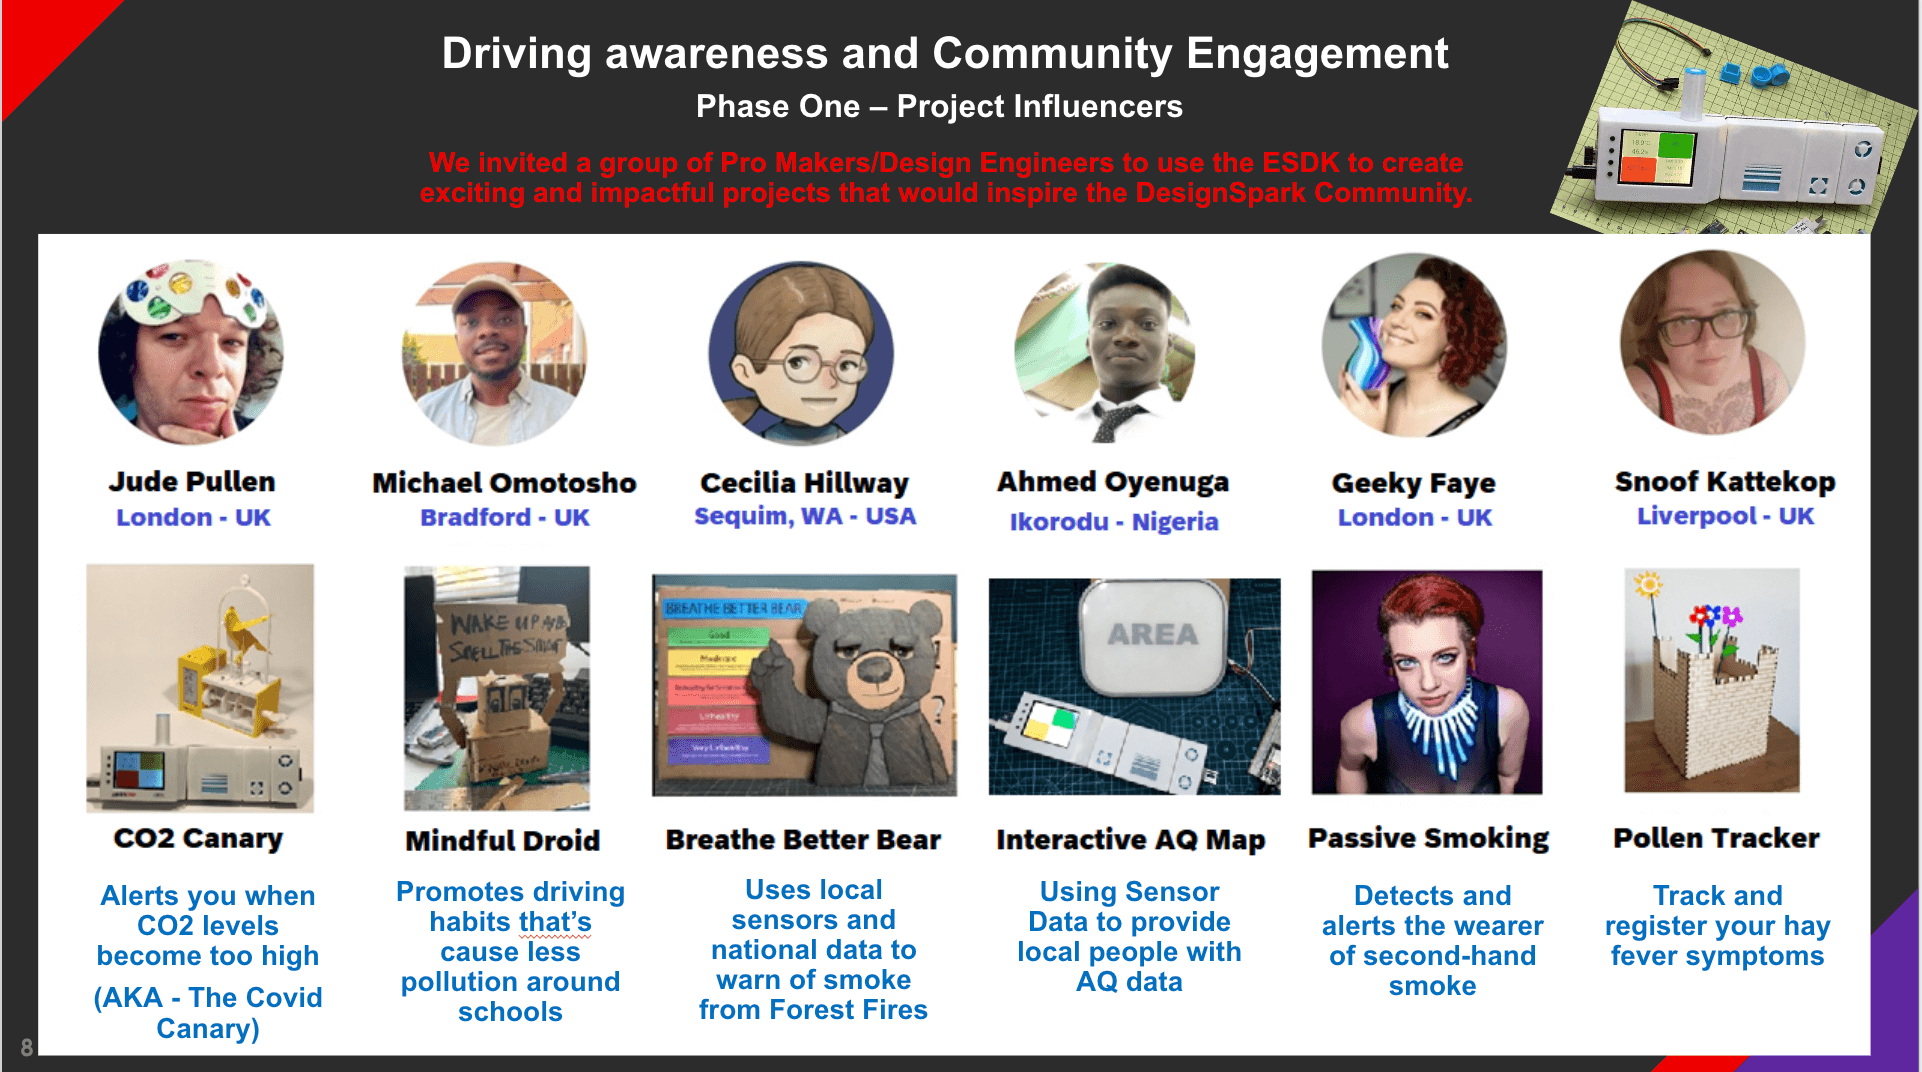 Informational slide about the technology influencers who DesignSpark sent ESDK kits to for the Air Quality Project.